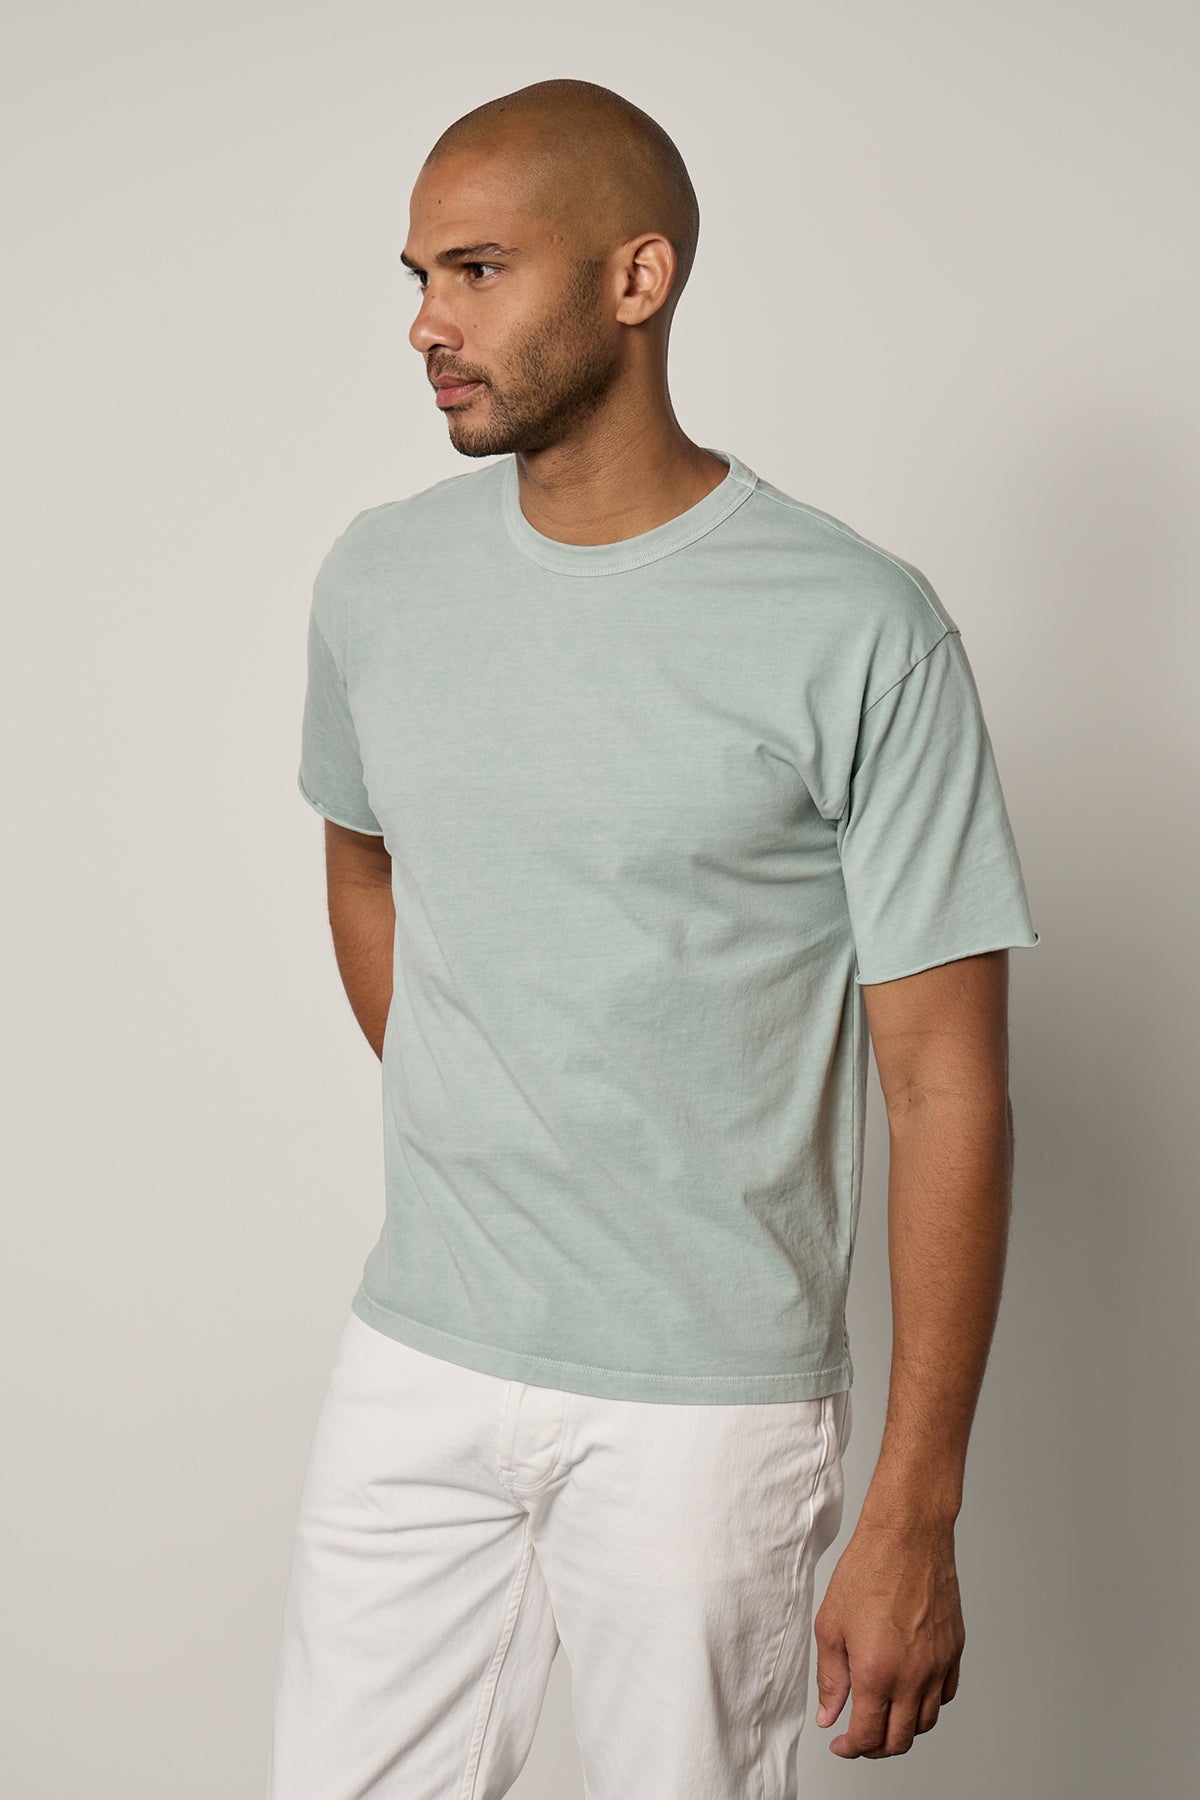   Man facing front wearing Beau Tee in mint green with white denim 